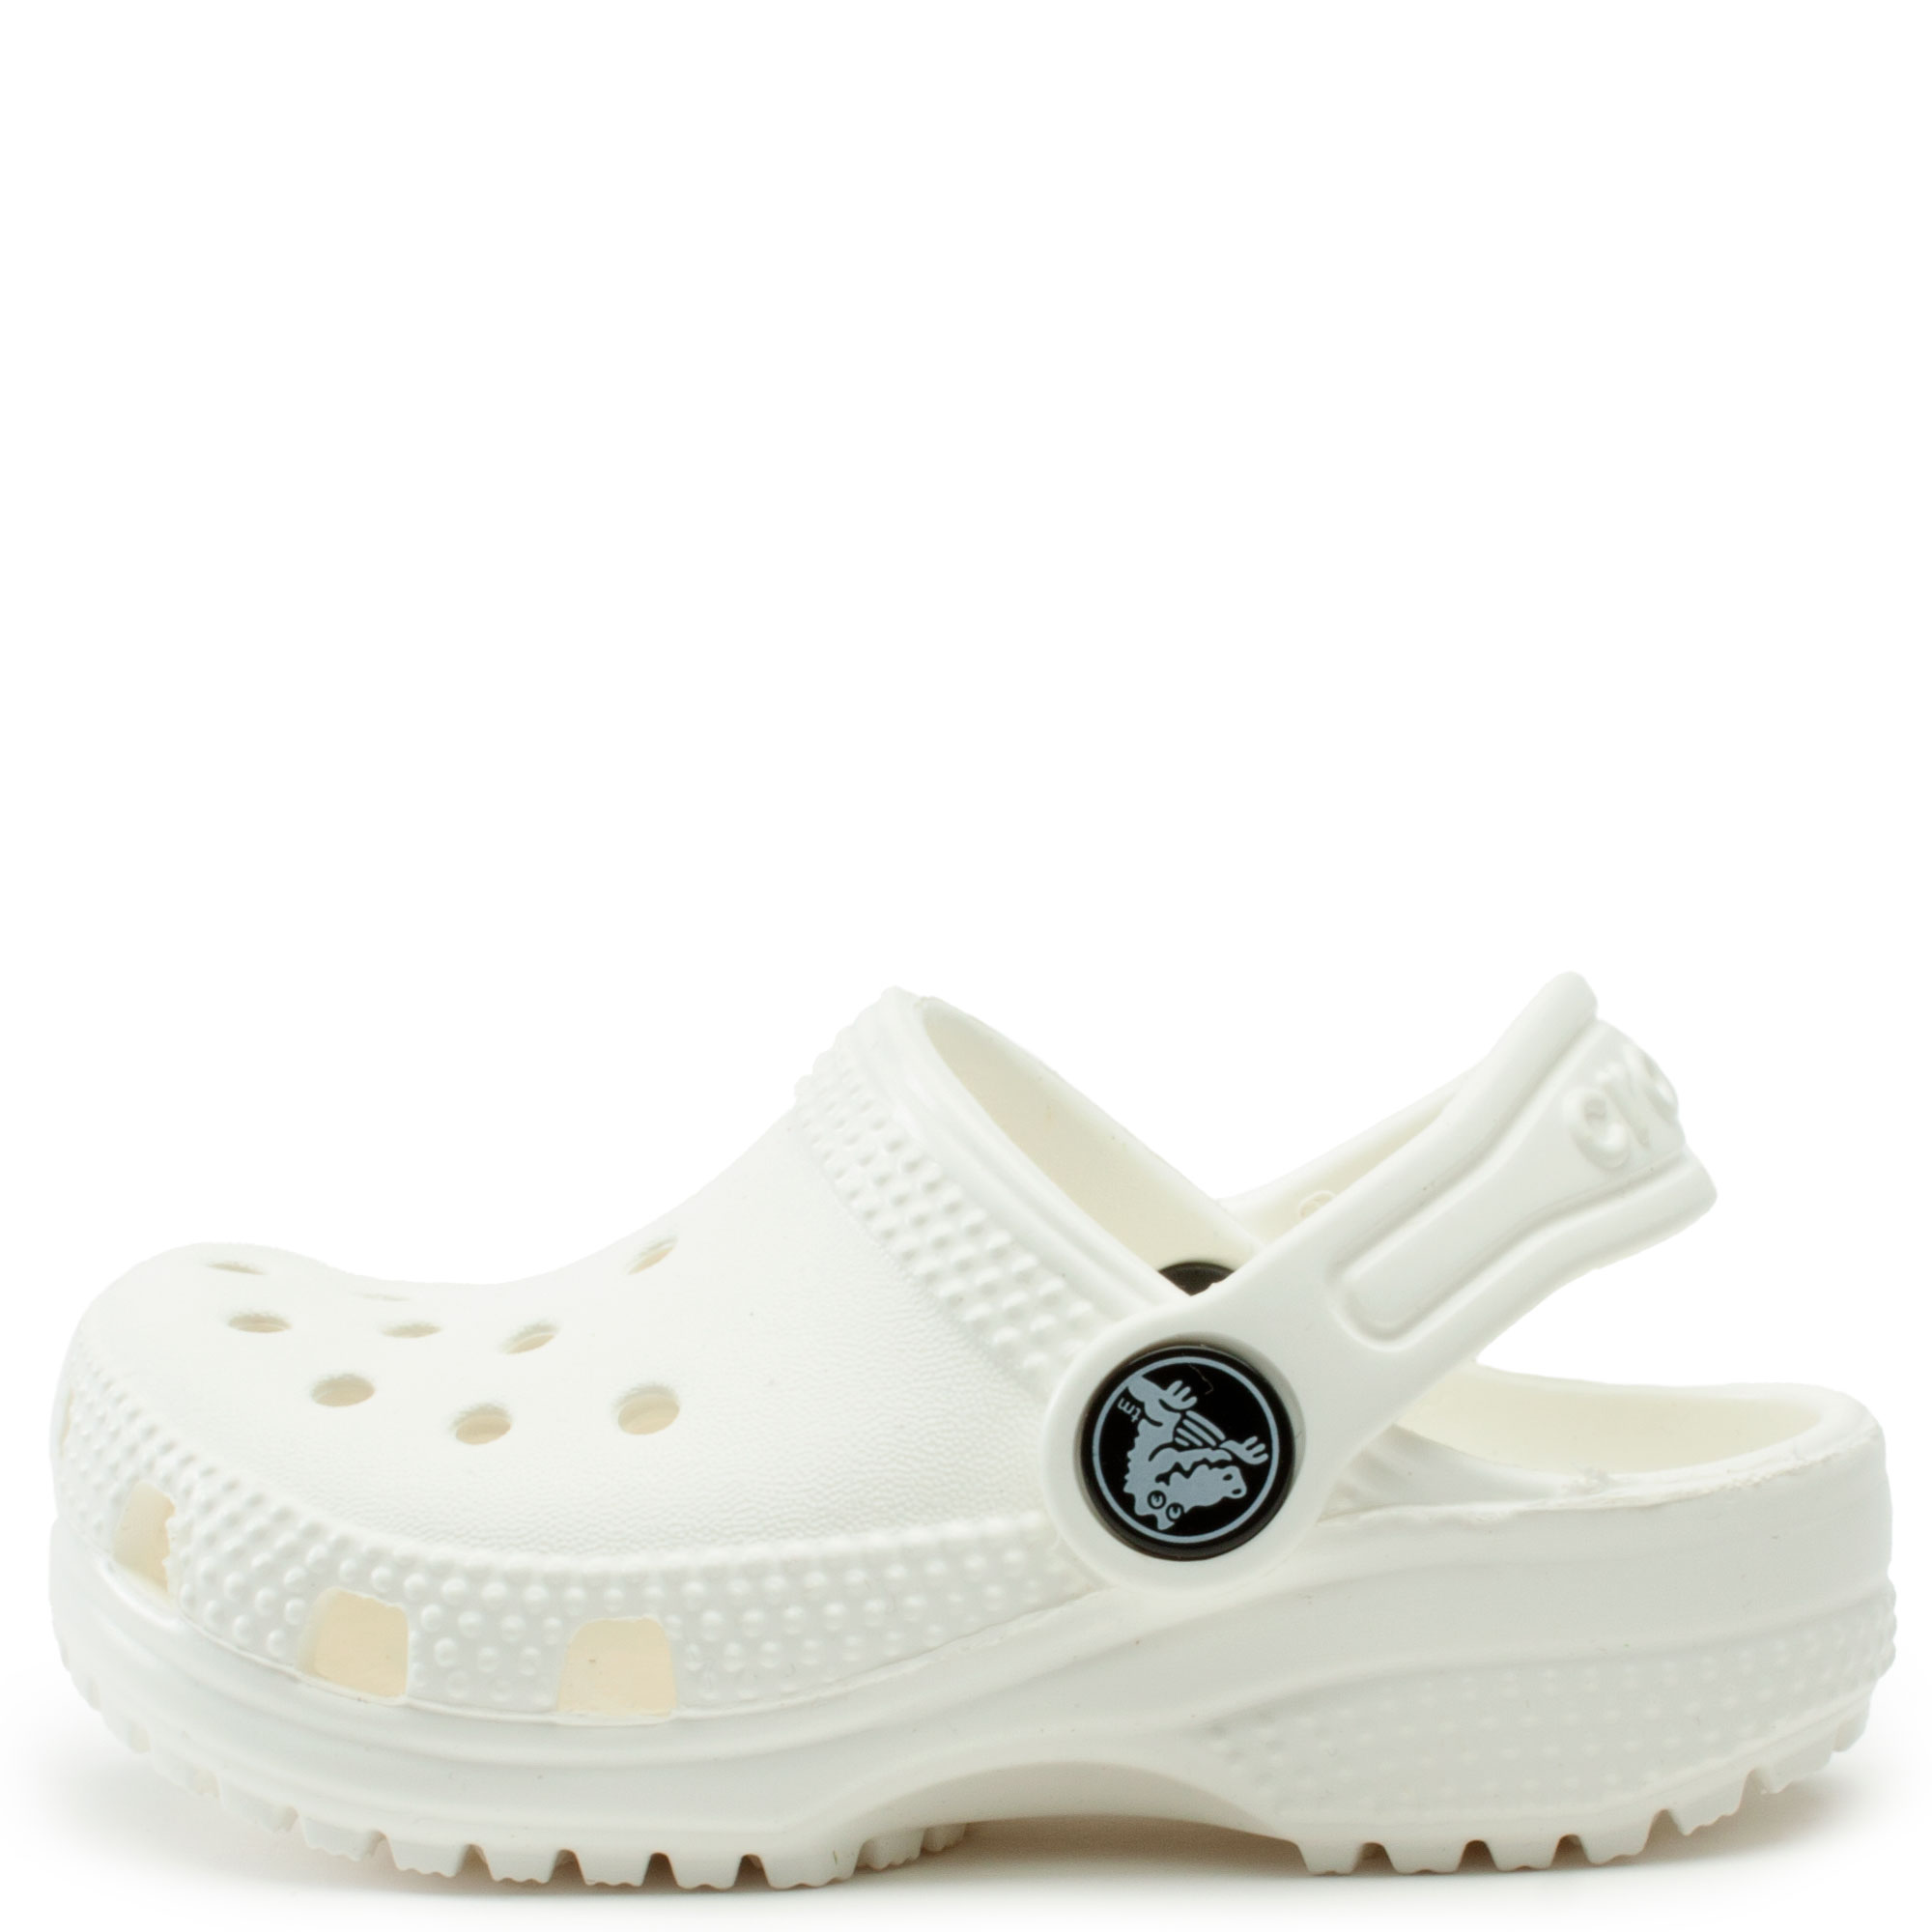 Kids' Shoes: Clogs, Sneakers, Sandals, More Crocs White, 45% OFF